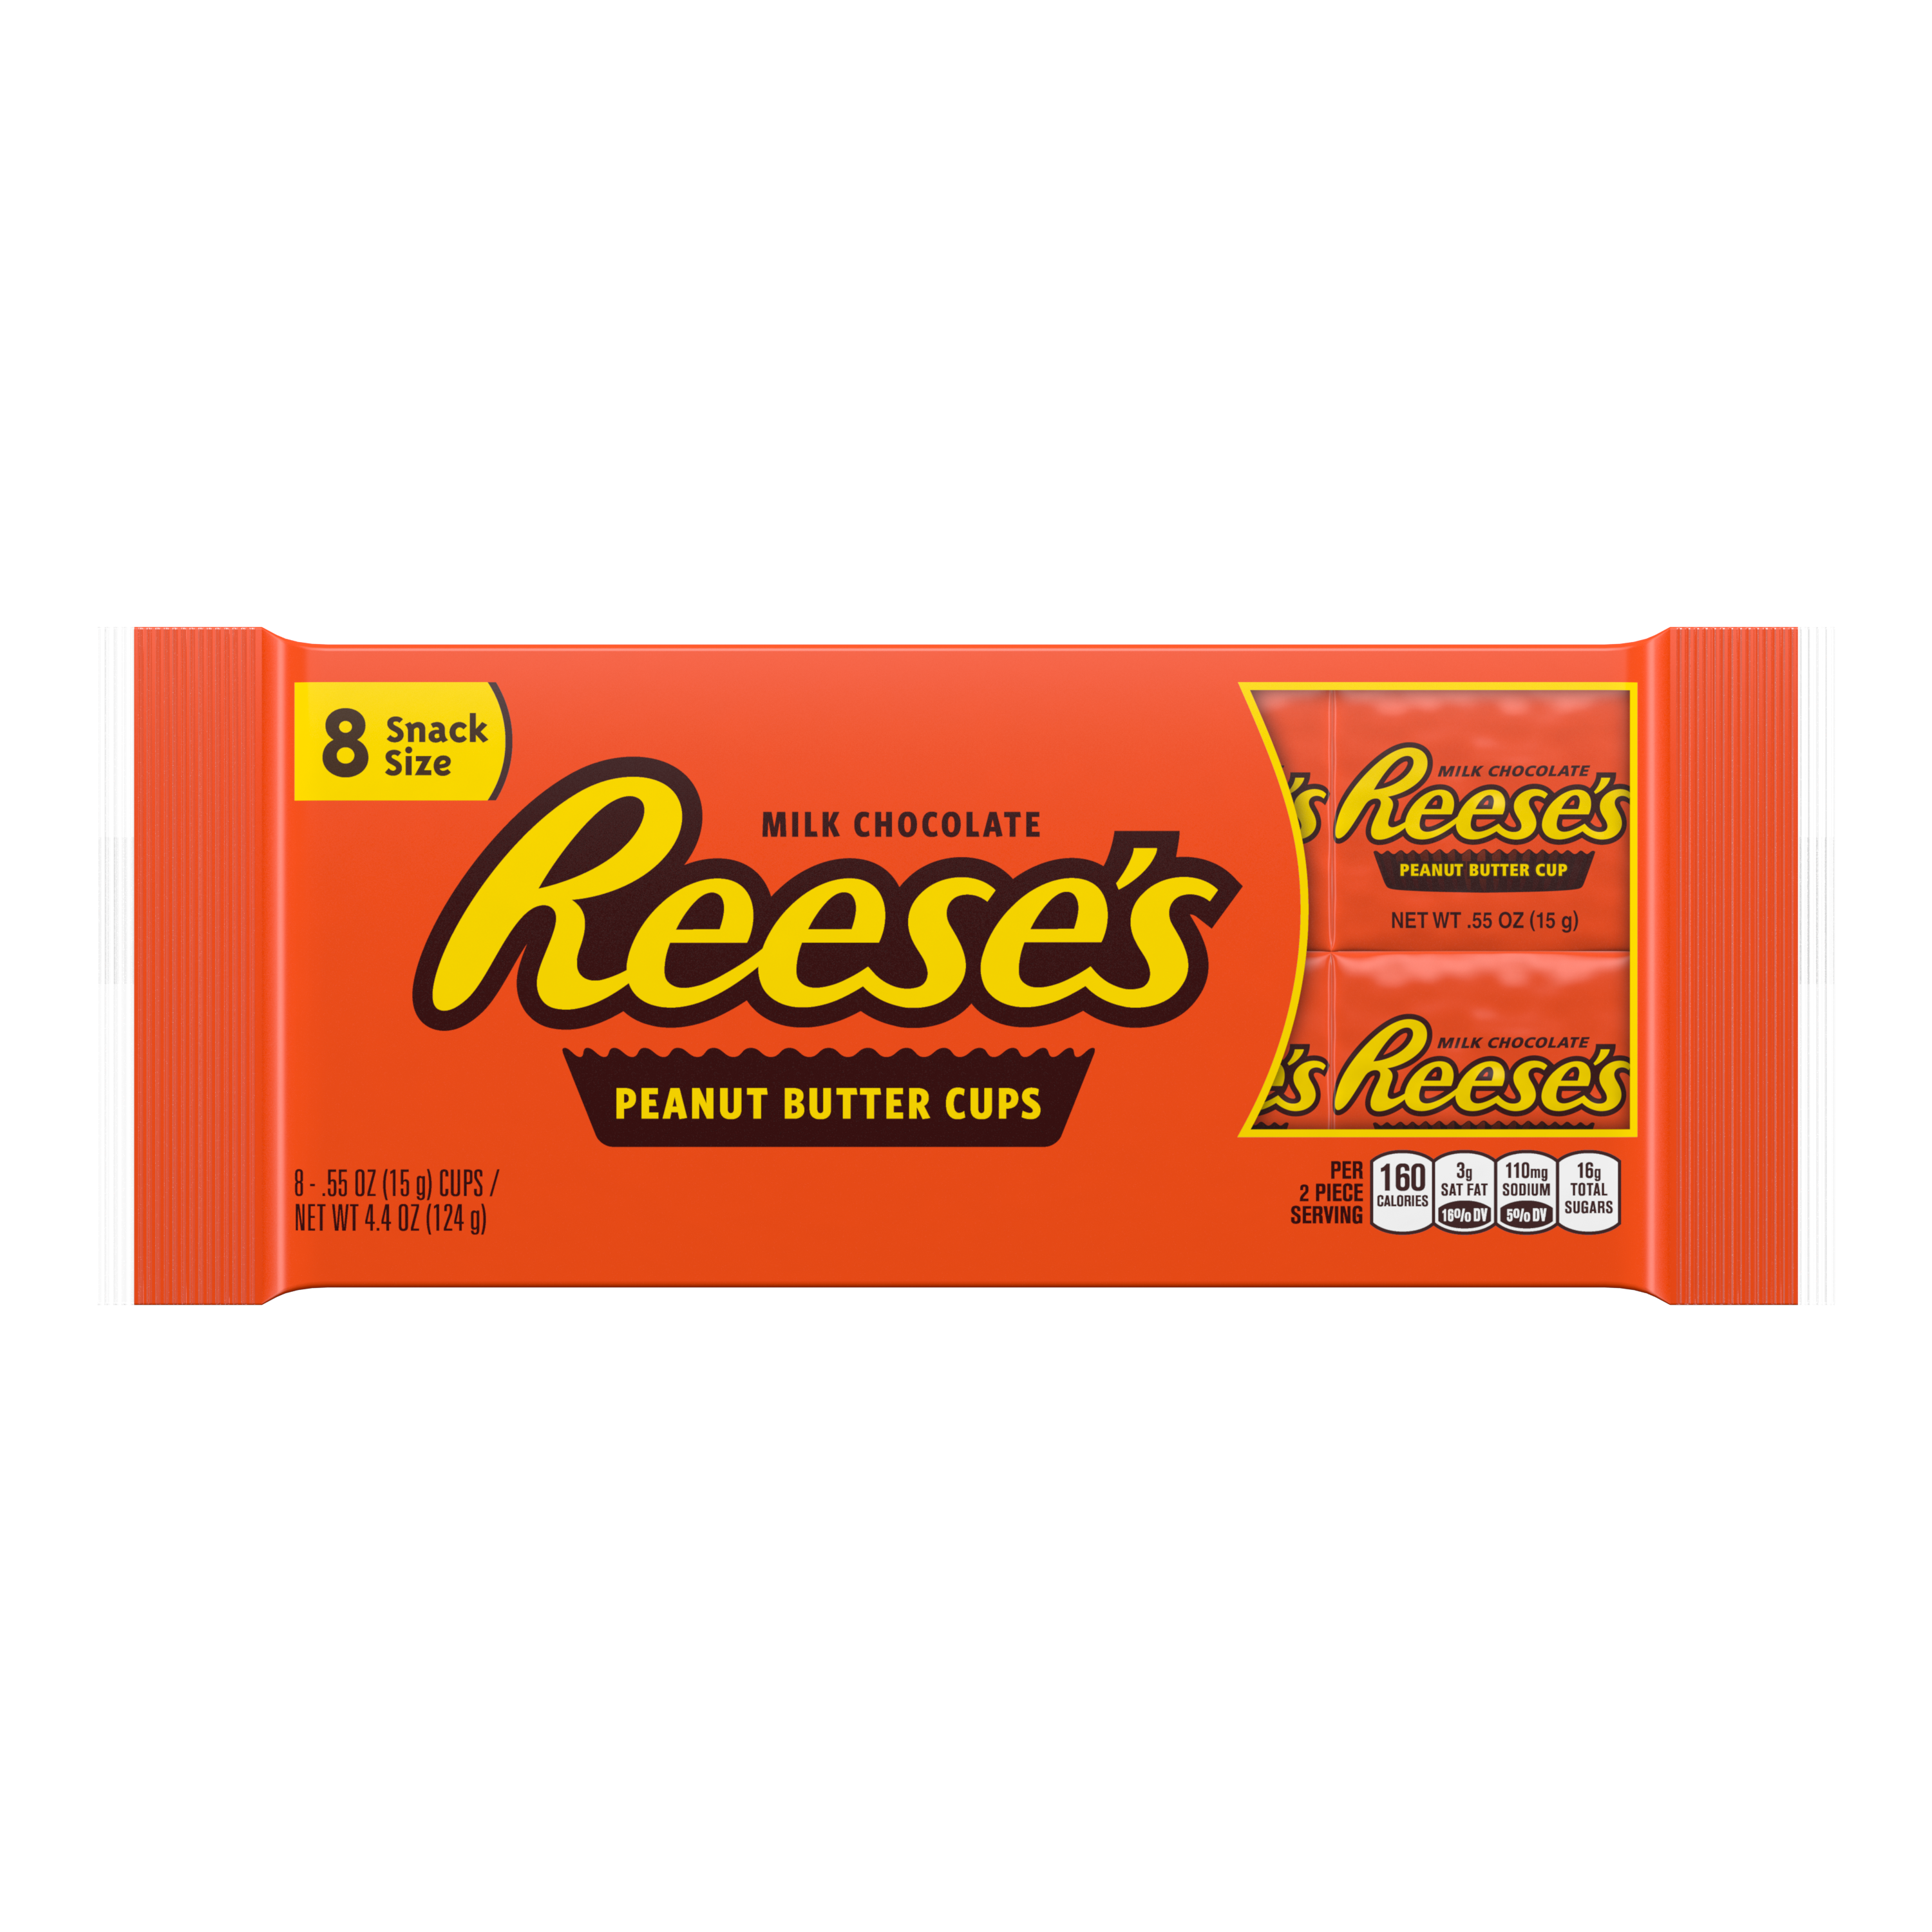 REESE'S Milk Chocolate Snack Size Peanut Butter Cups, 4.4 oz, 8 pack - Front of Package